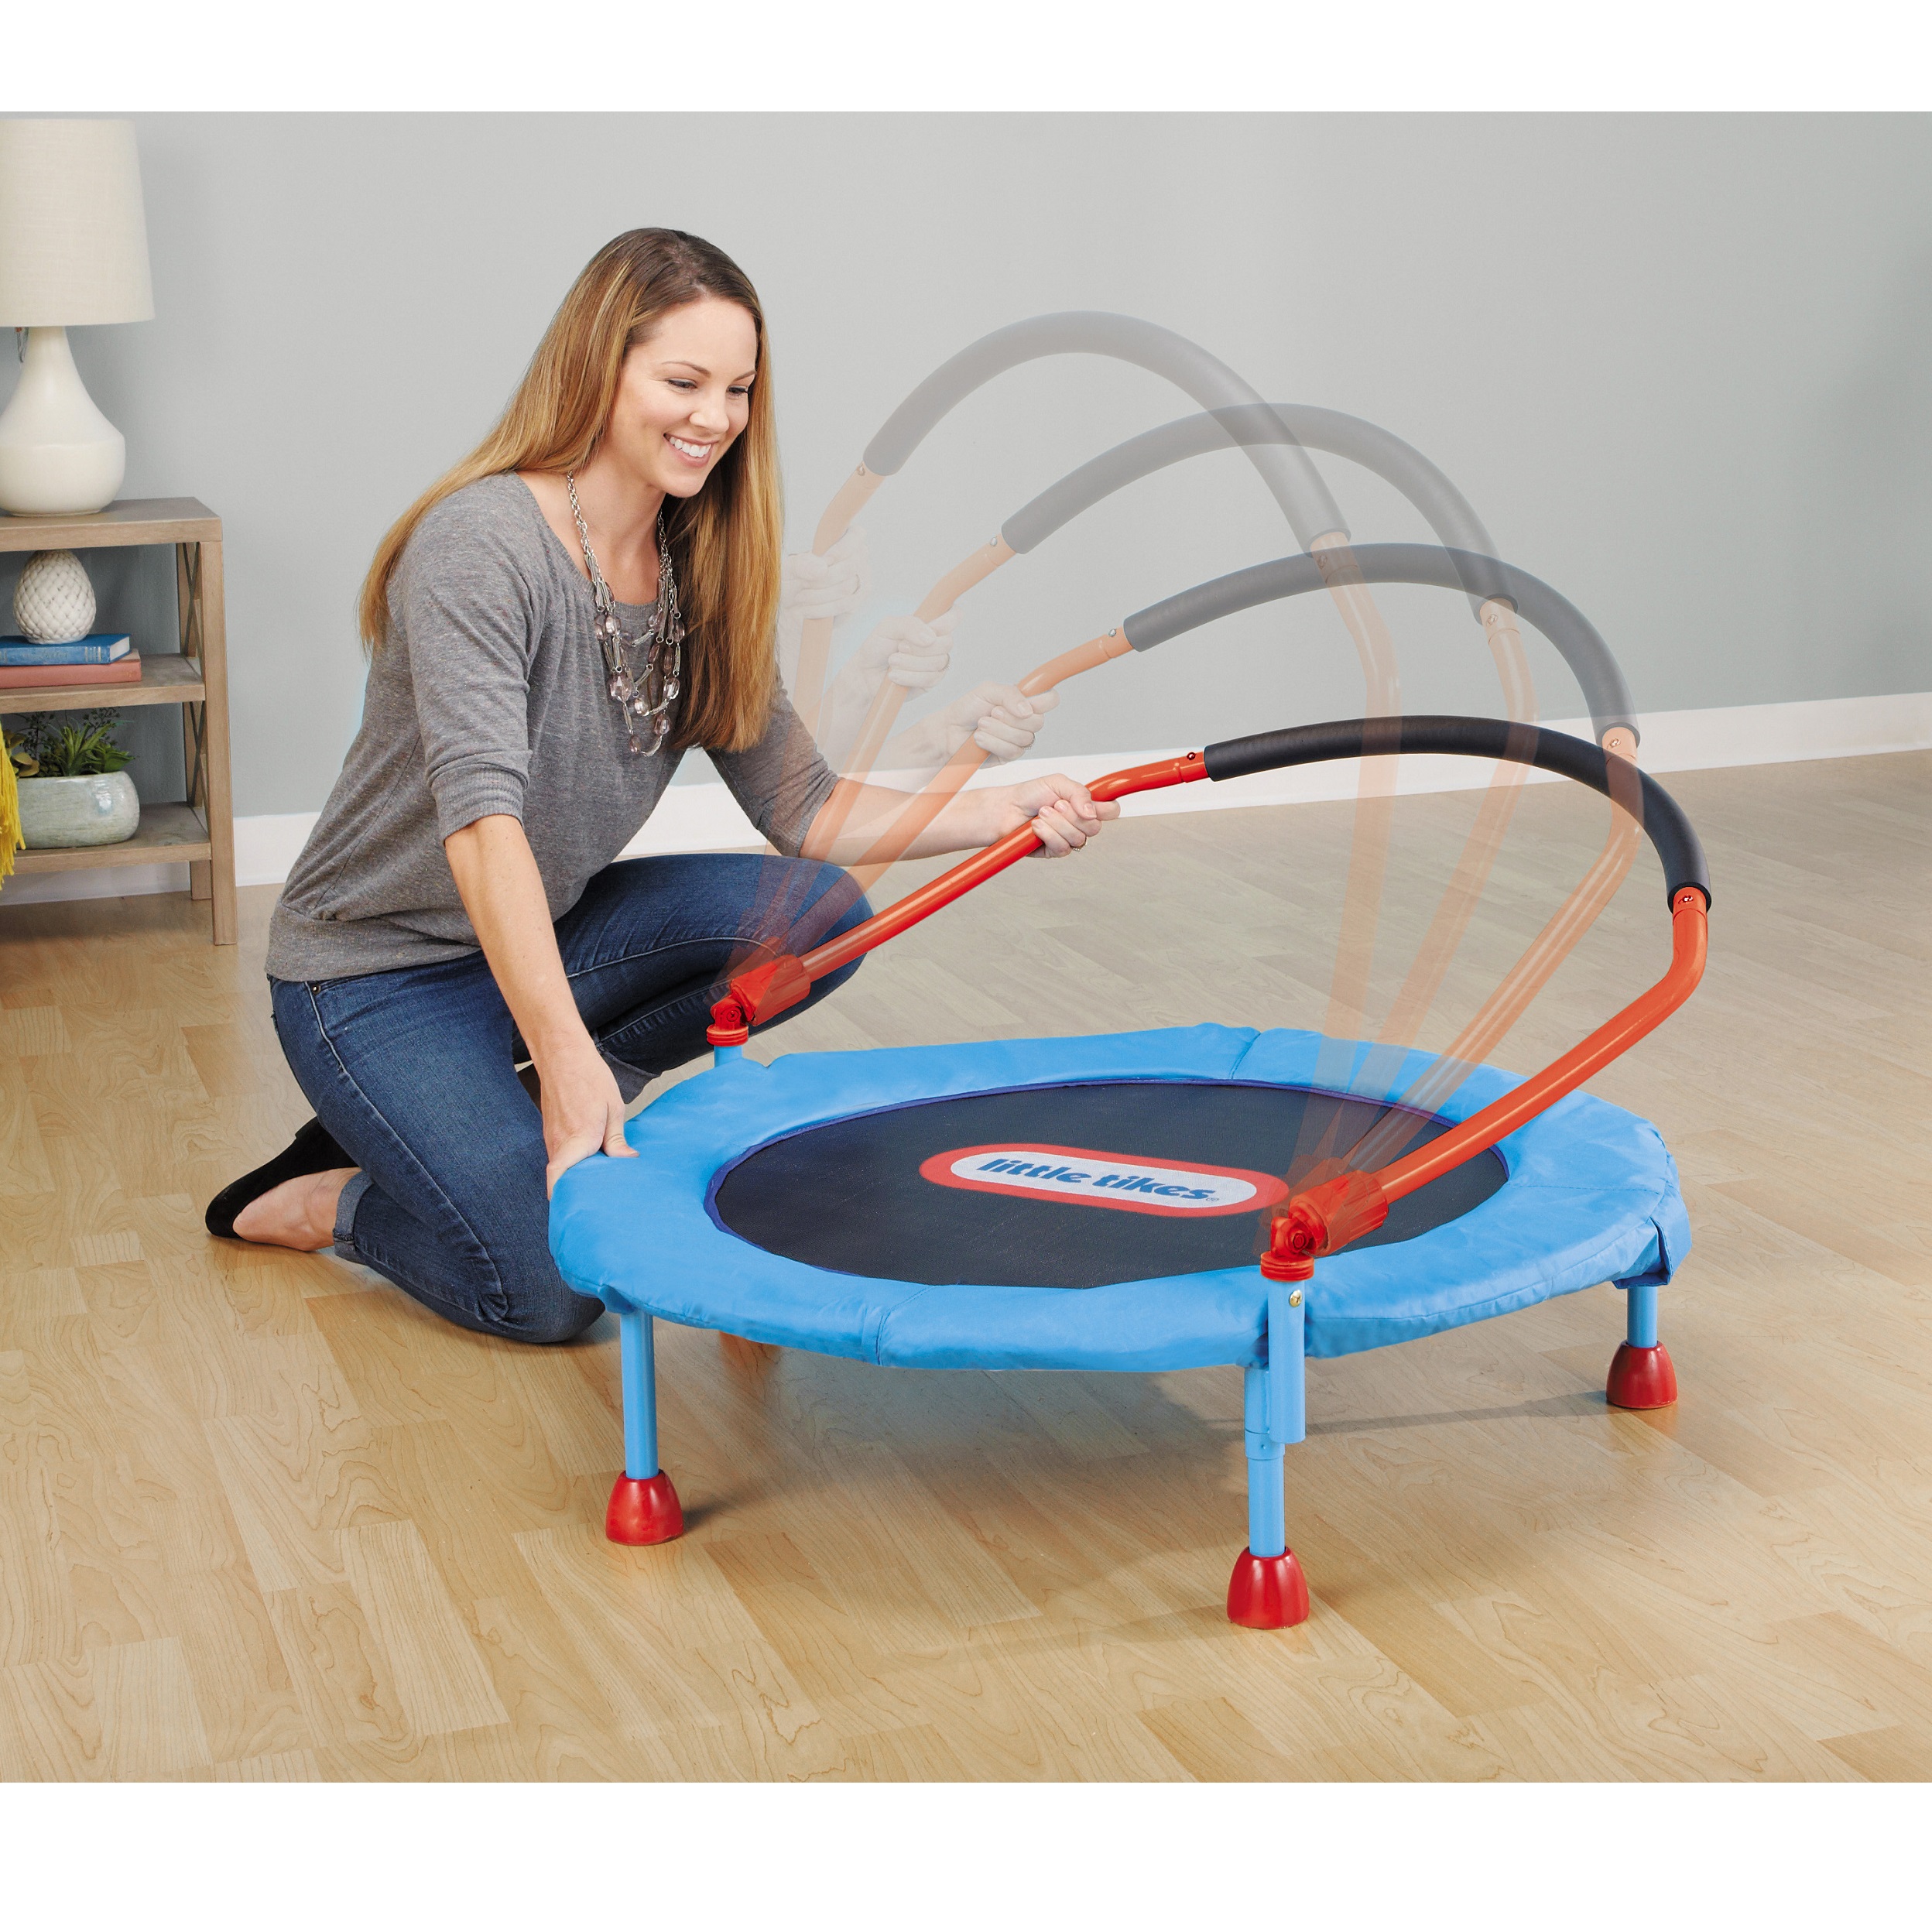 Little Tikes Easy Store 3-Foot Trampoline, with Hand Rail, Blue - image 5 of 8